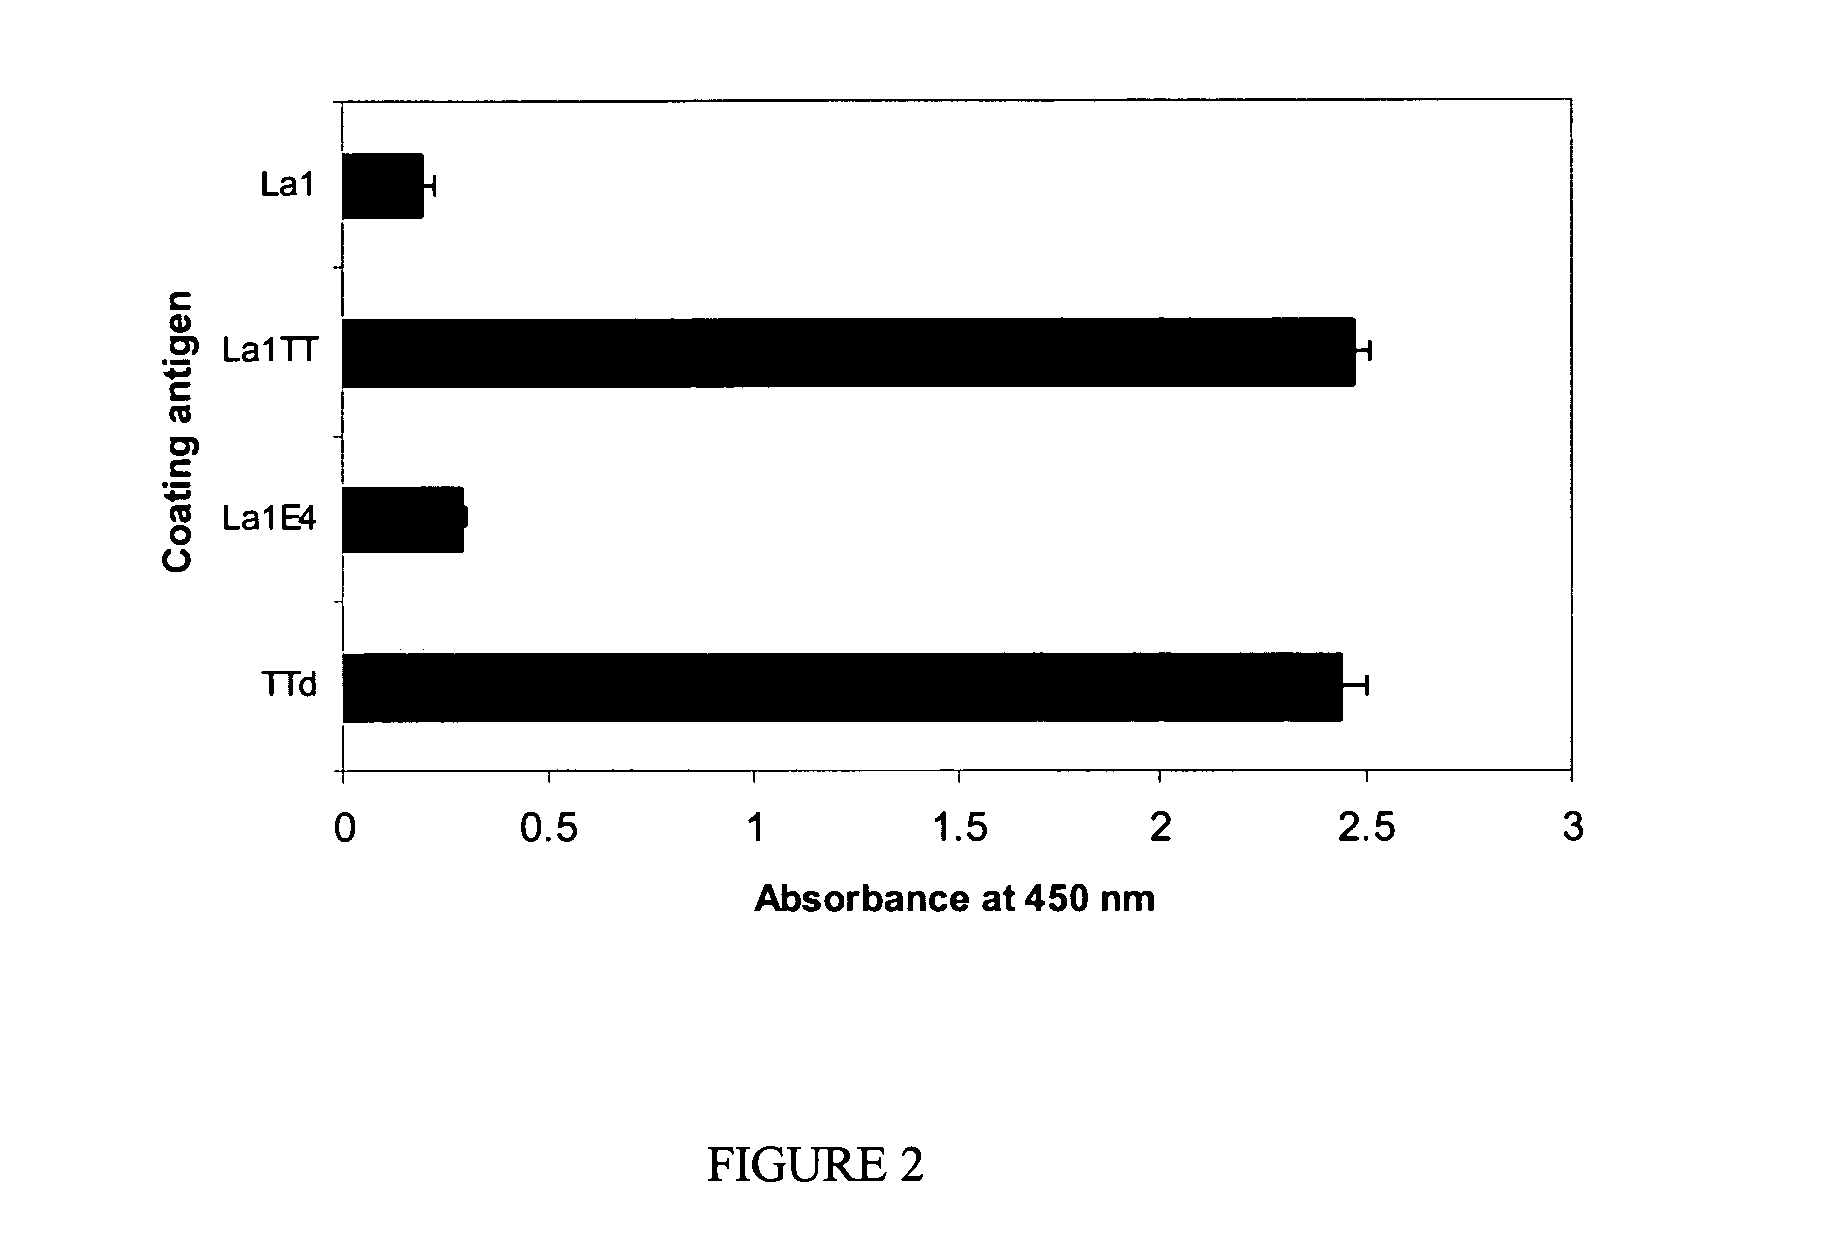 Lactic acid bacteria as agents for treating and preventing allergy